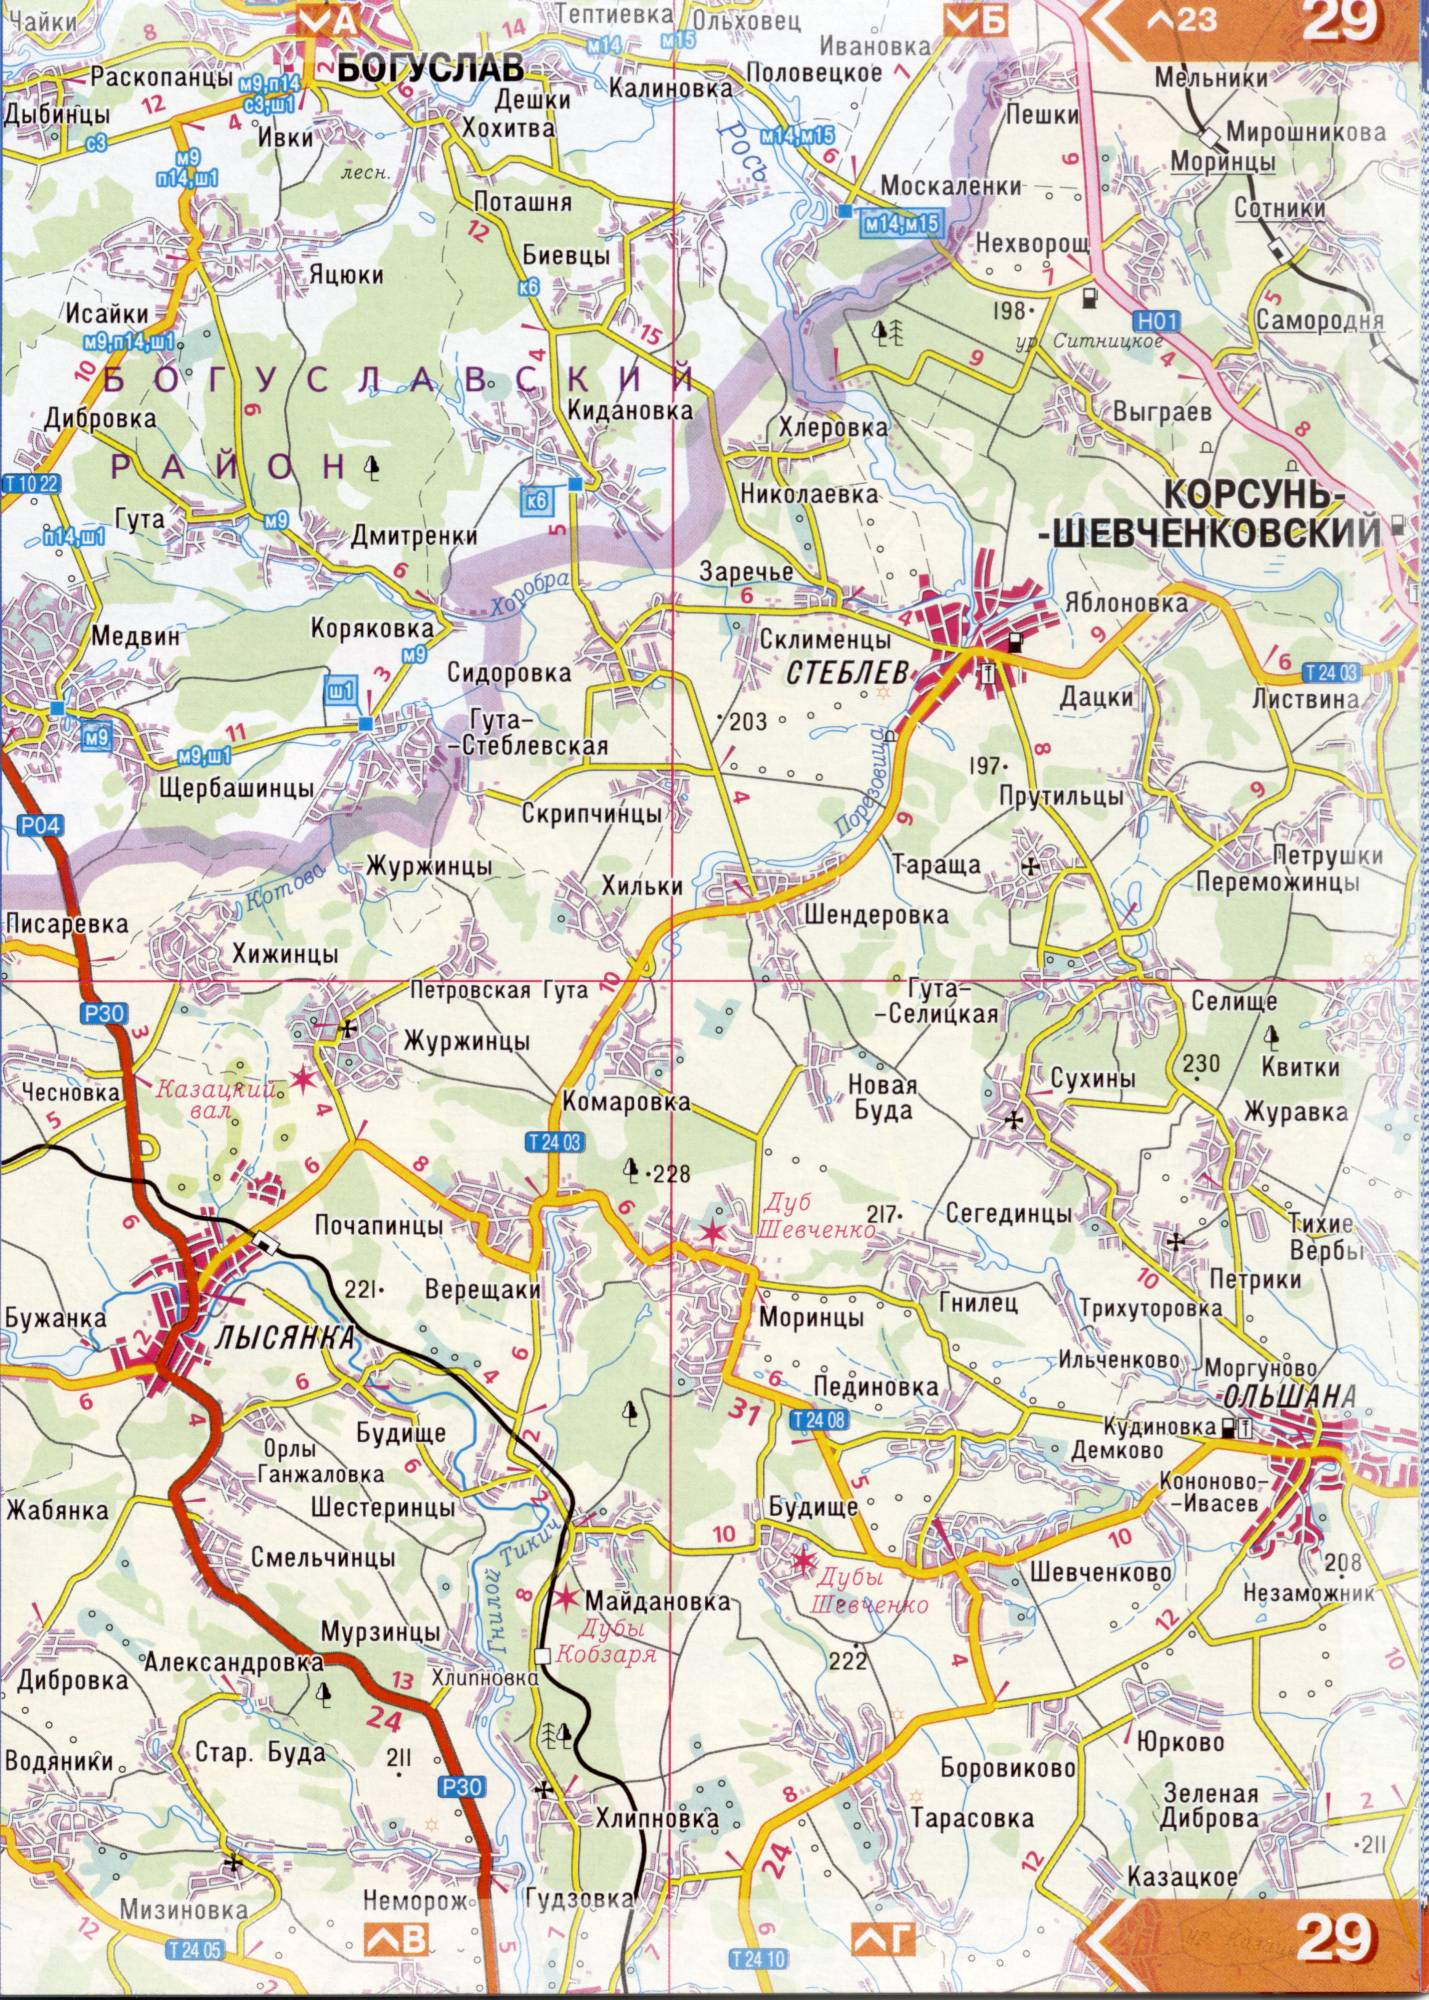 Atlas of the Kiev region. Detailed map of the Kiev region from the road atlas. Kiev region on a detailed map of scale 1cm = 3km. Free Download, E5